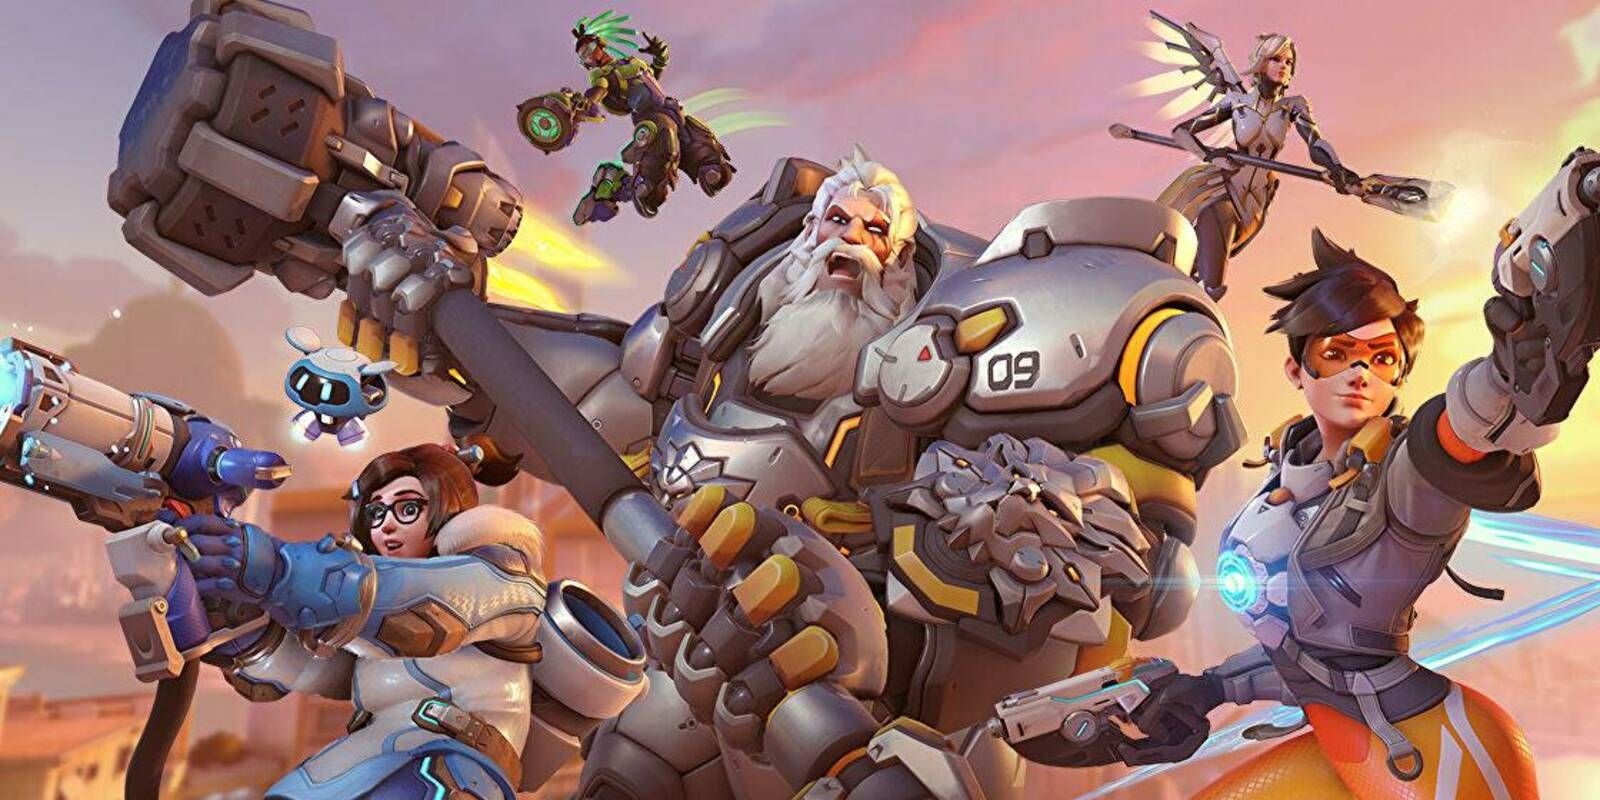 A team of Overwatch characters in combat